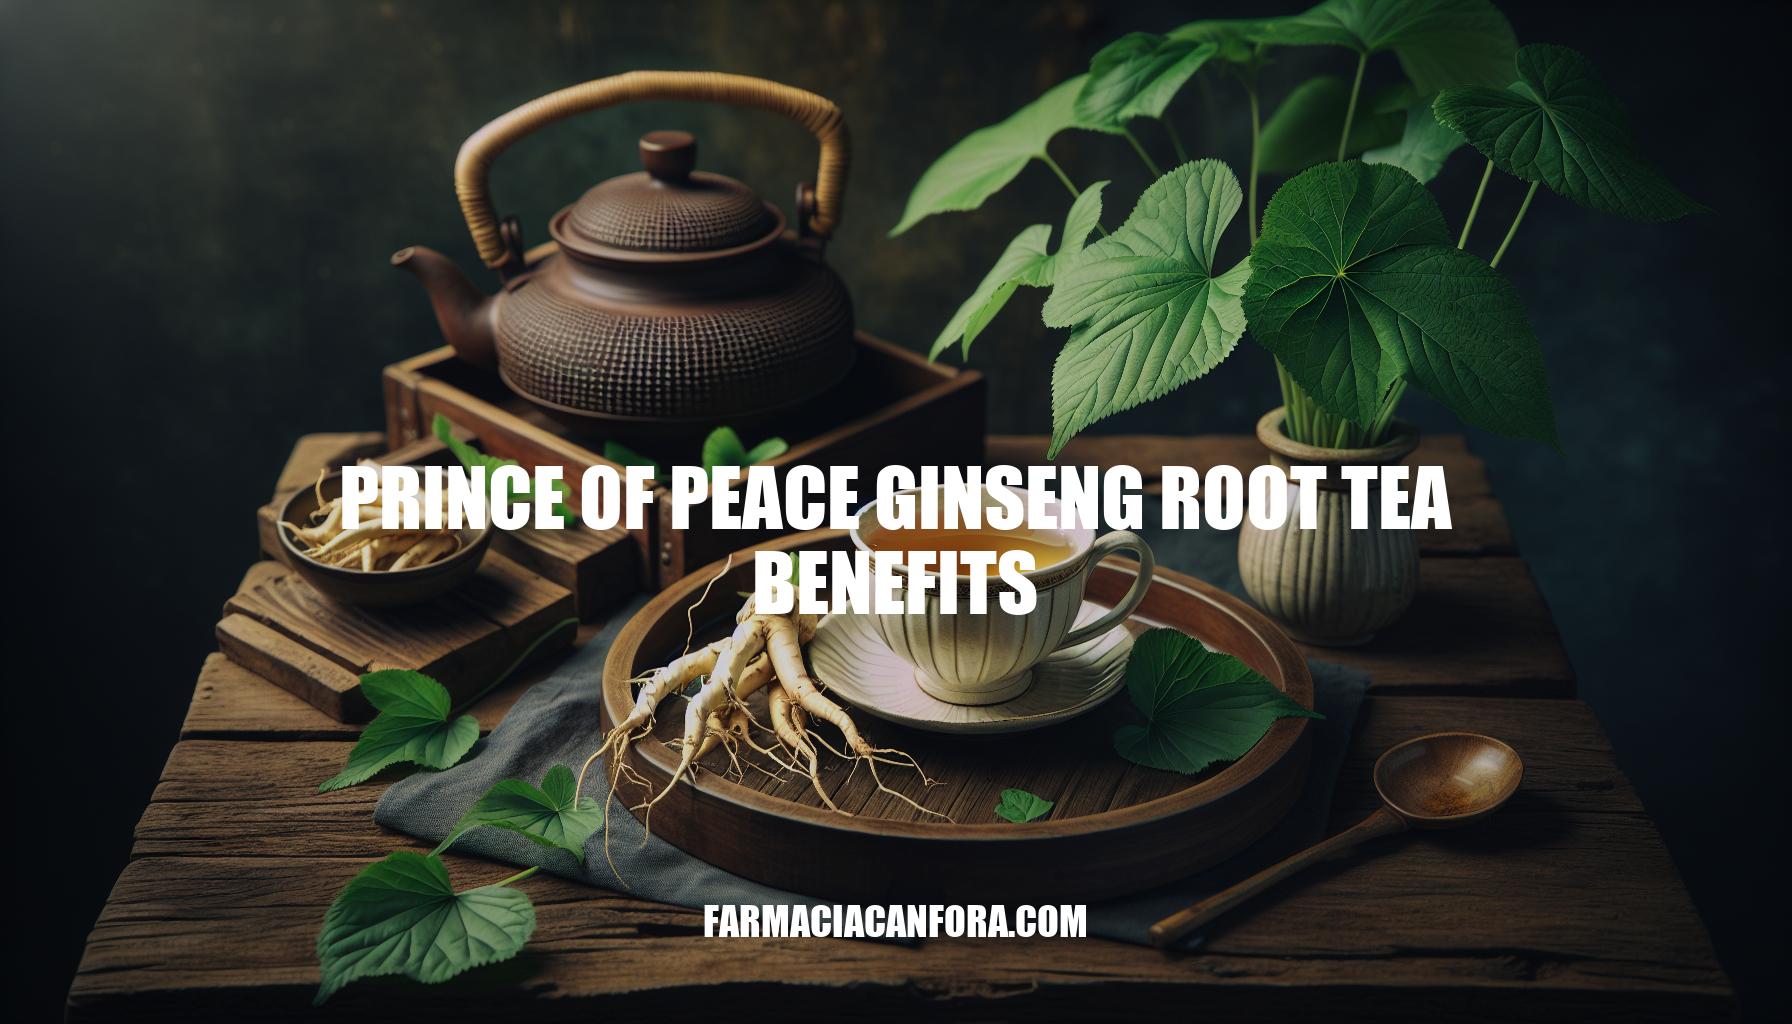 Discover the Benefits of Prince of Peace Ginseng Root Tea